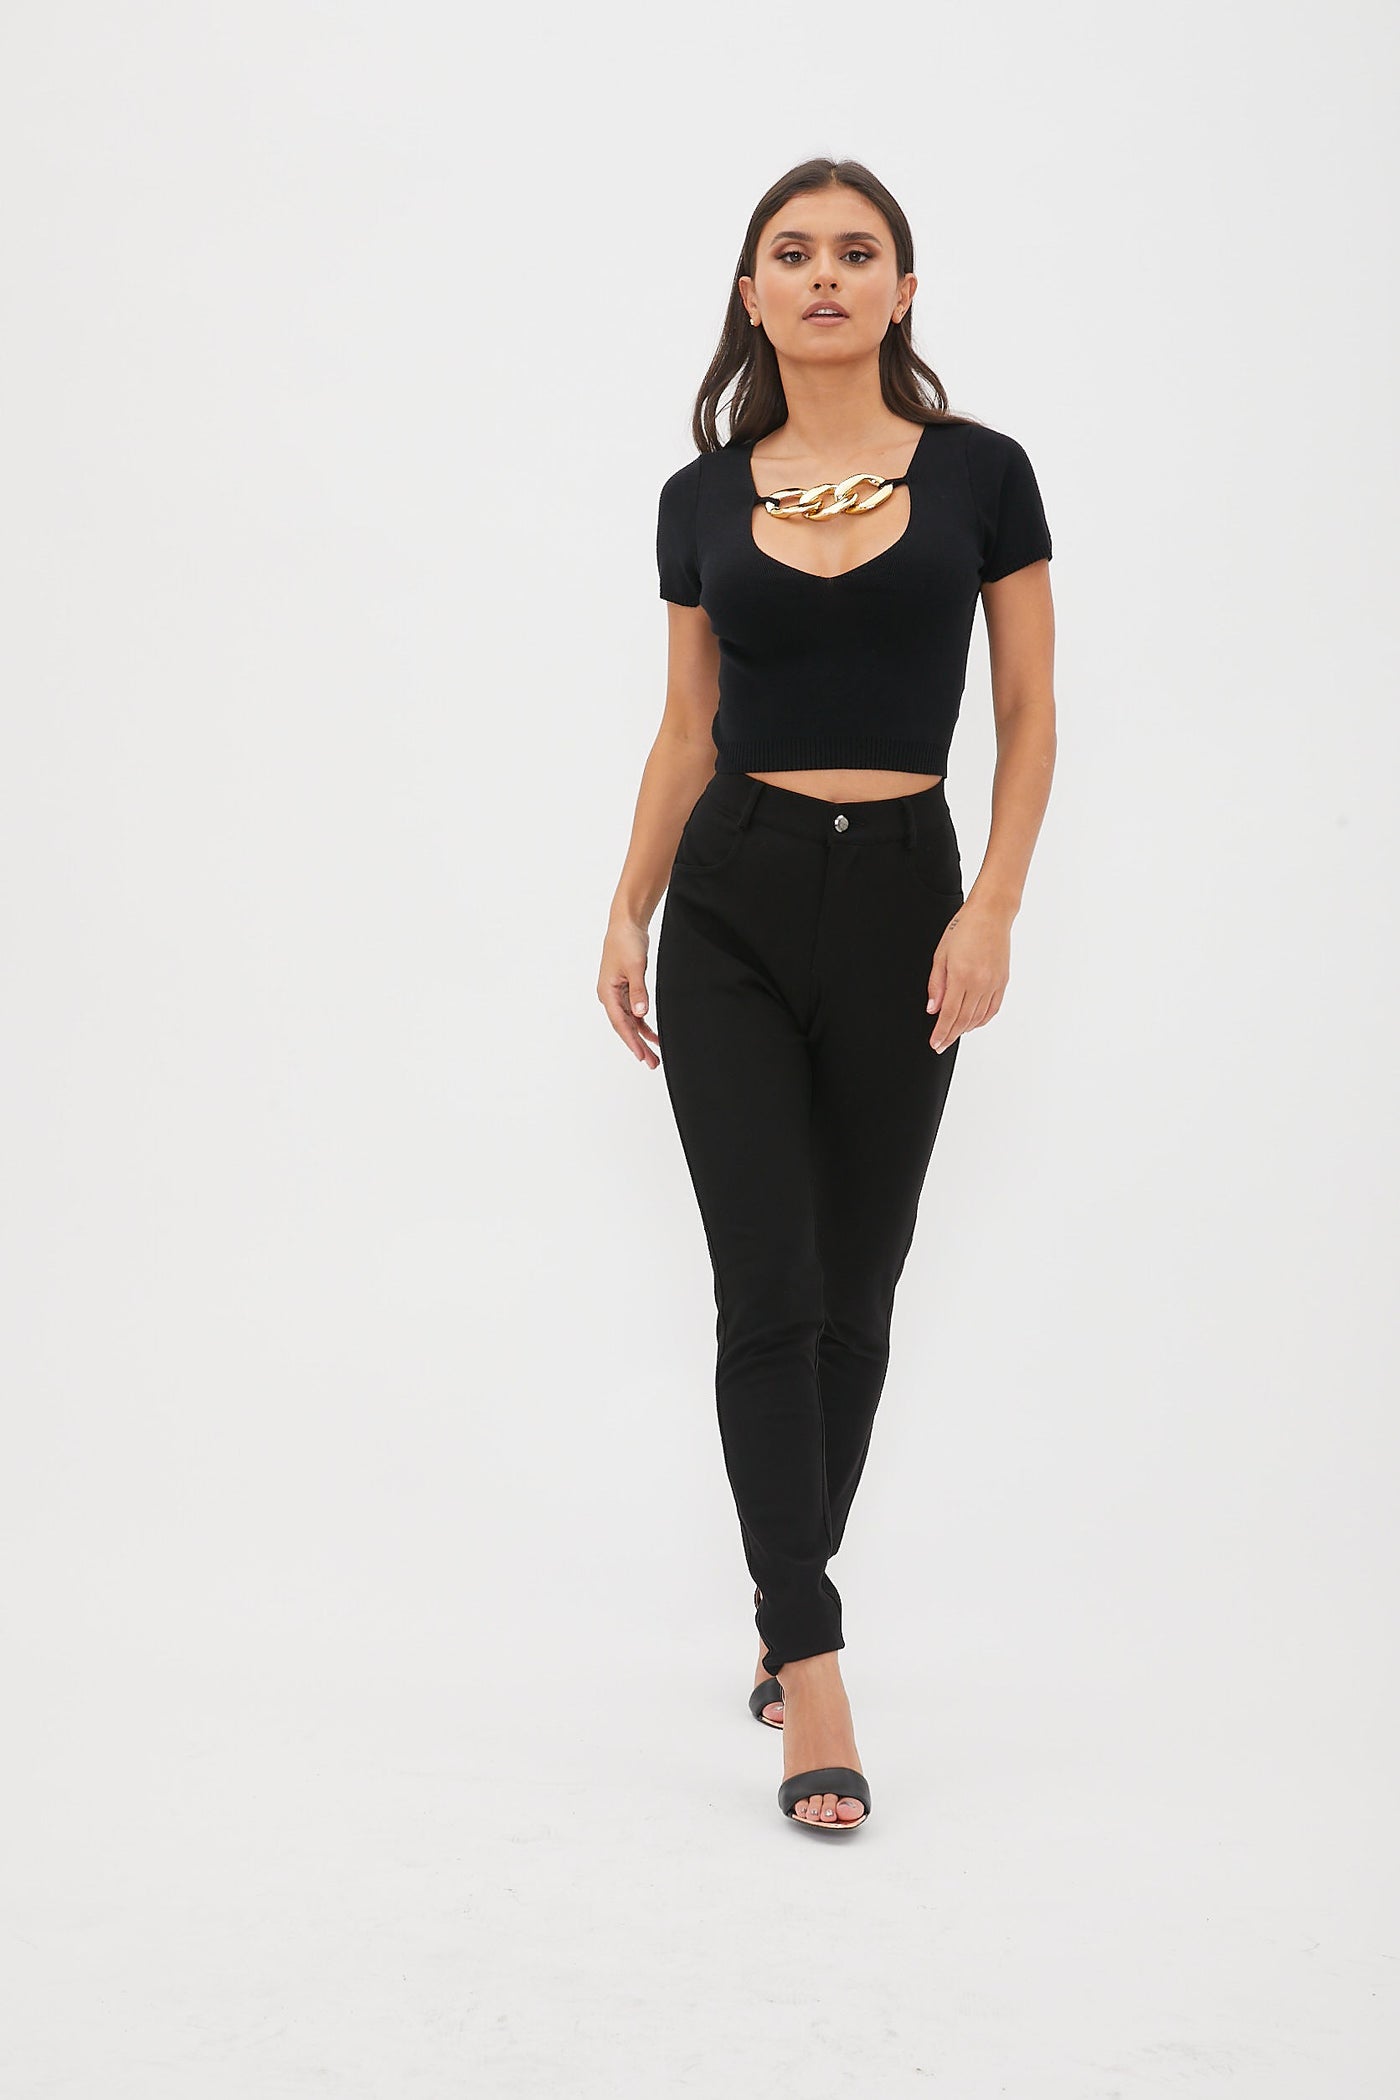 Black Label Black Crop top with Chain